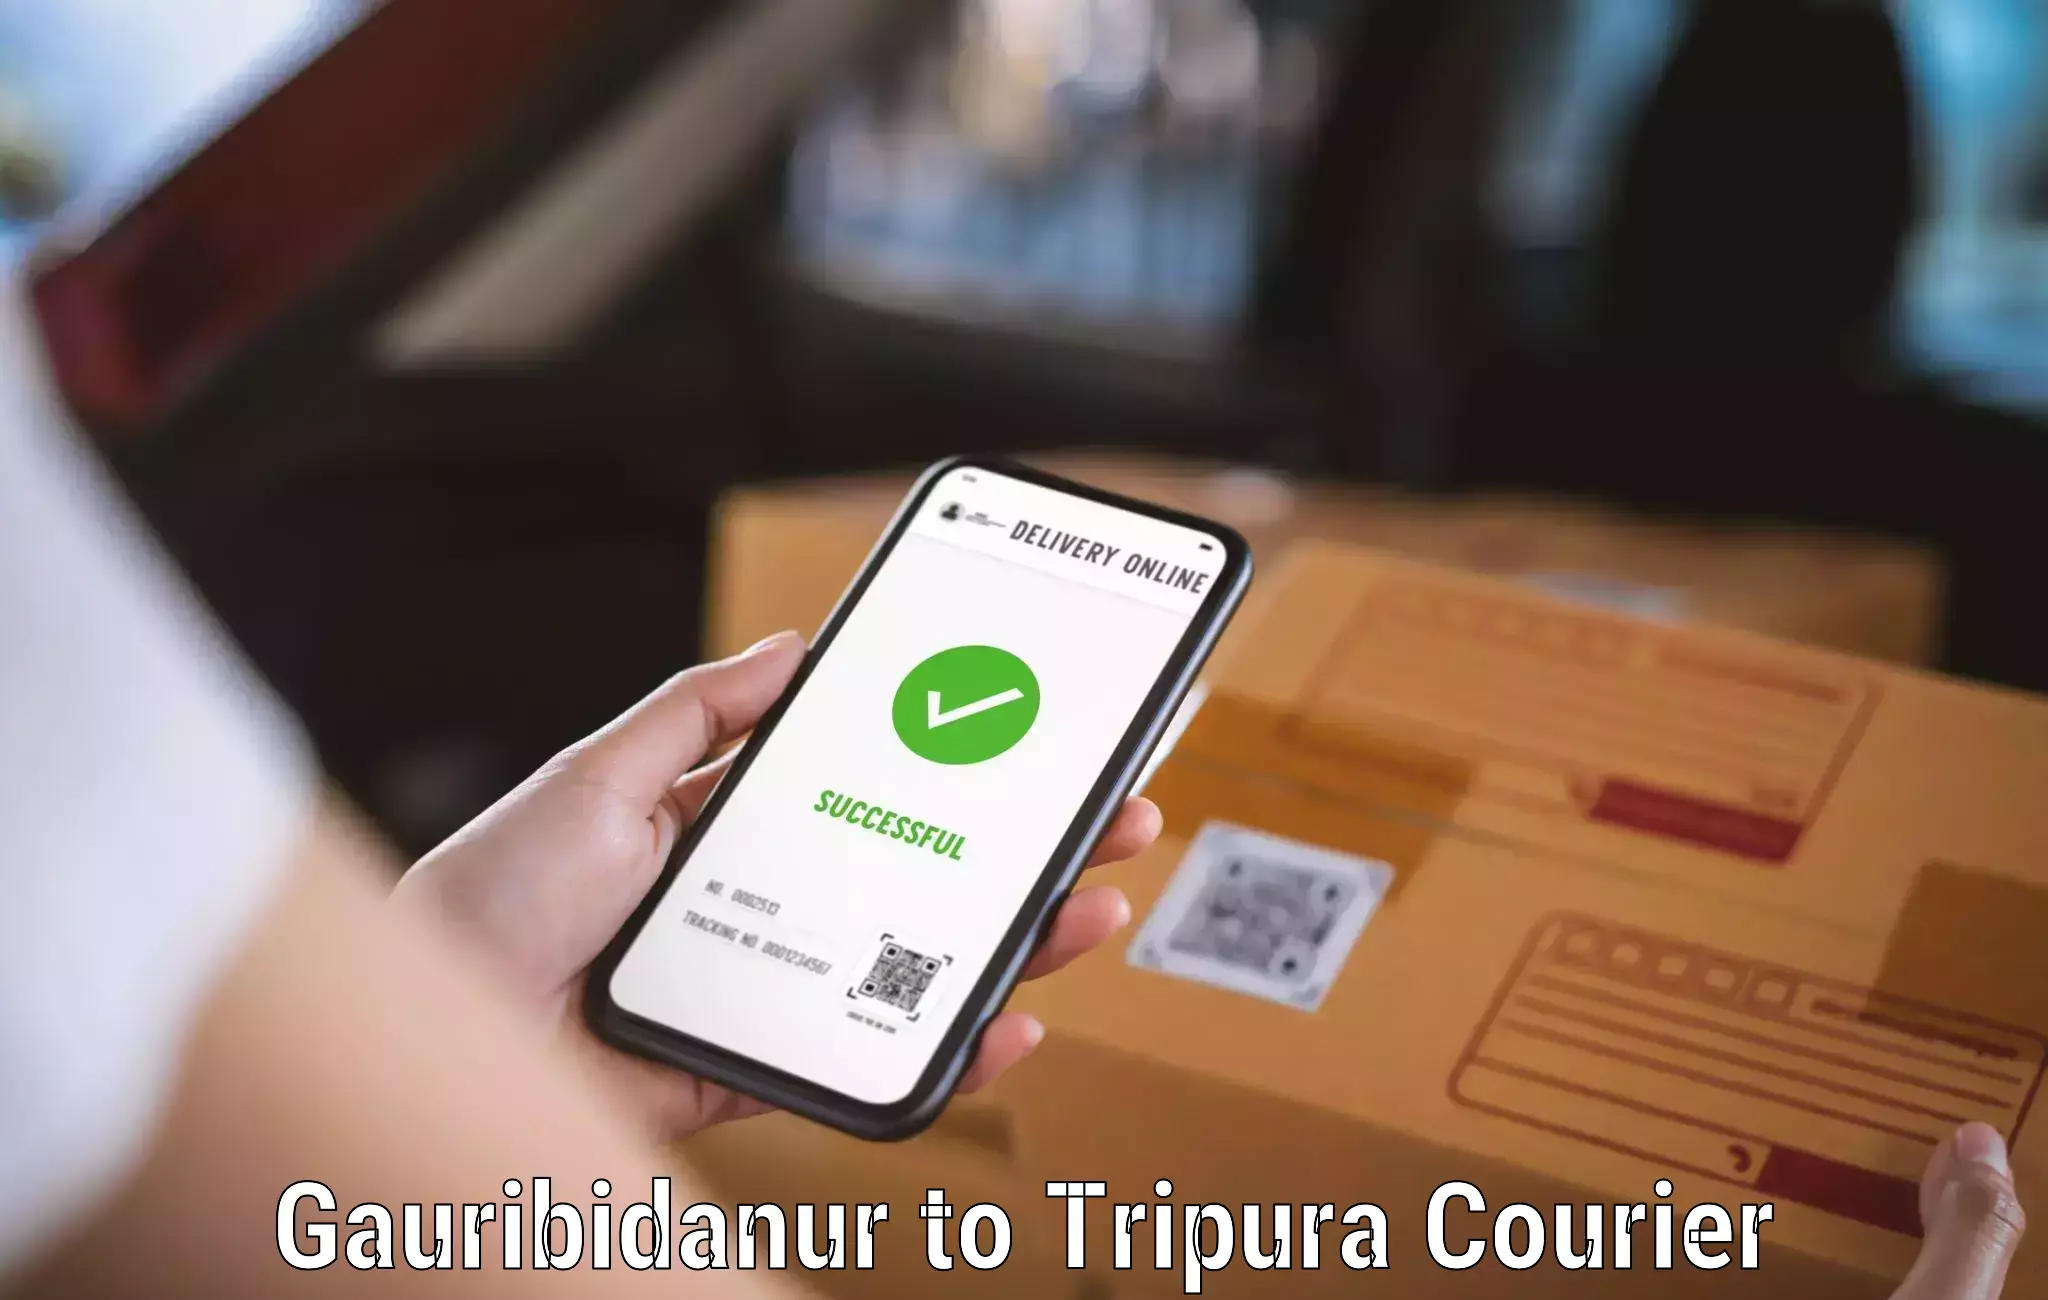 Next-day delivery options in Gauribidanur to Udaipur Tripura